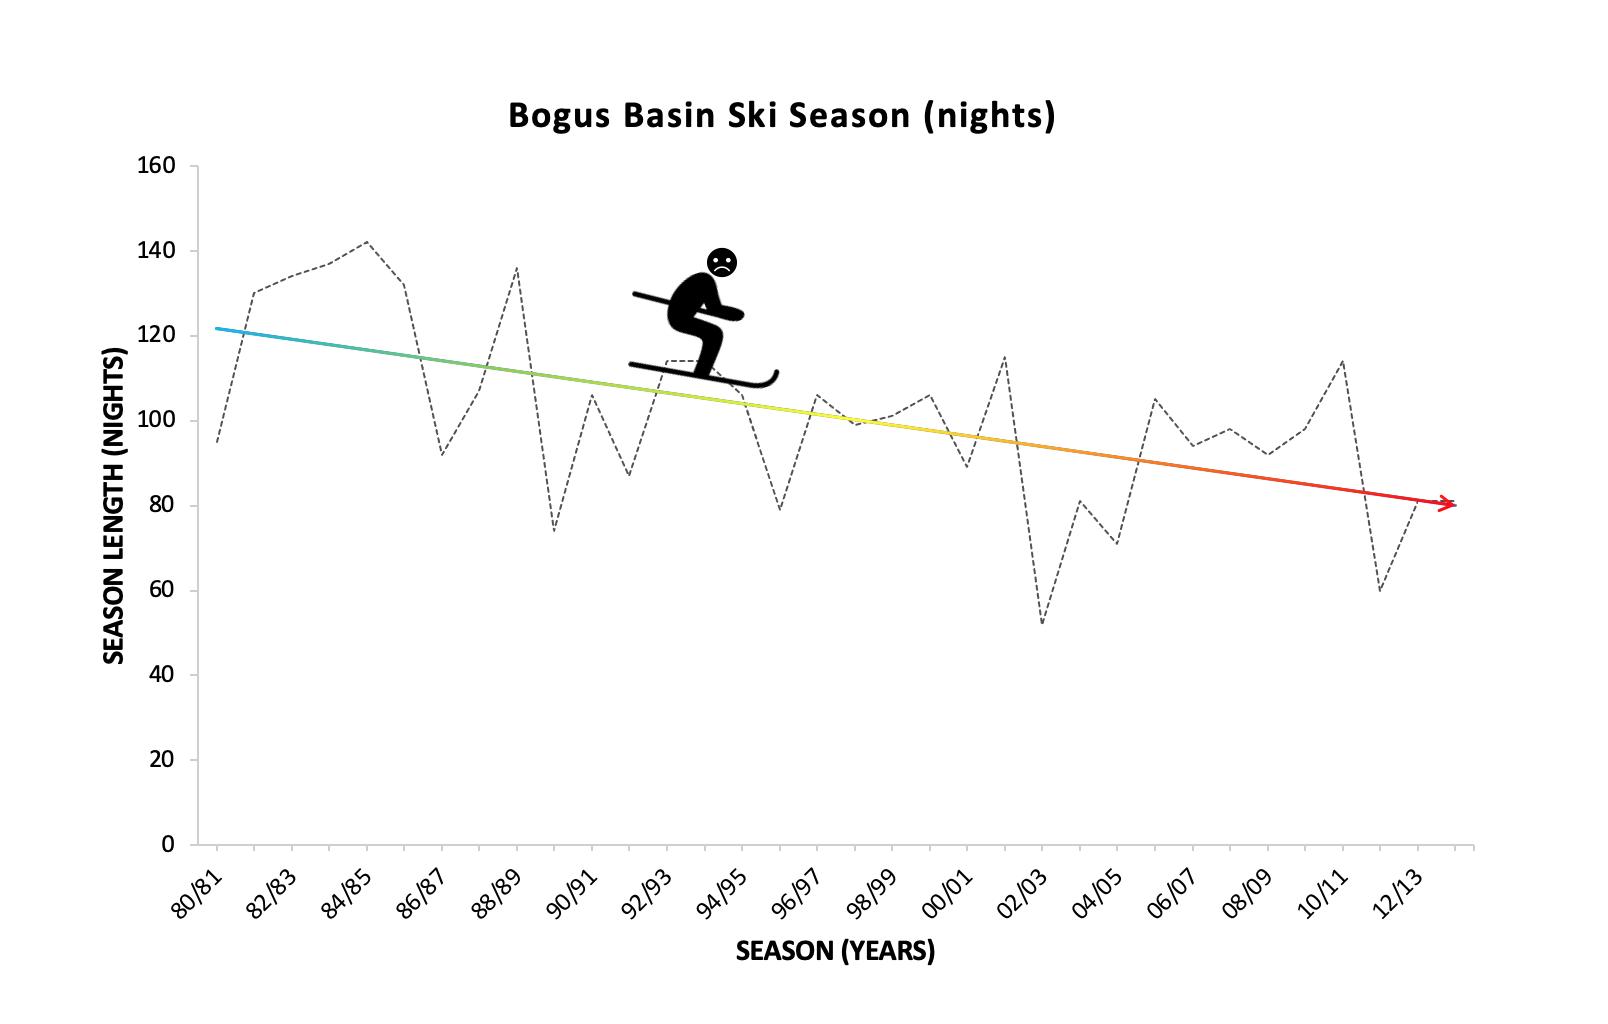 Line graph showing the decline of bogus basin ski seasons at night